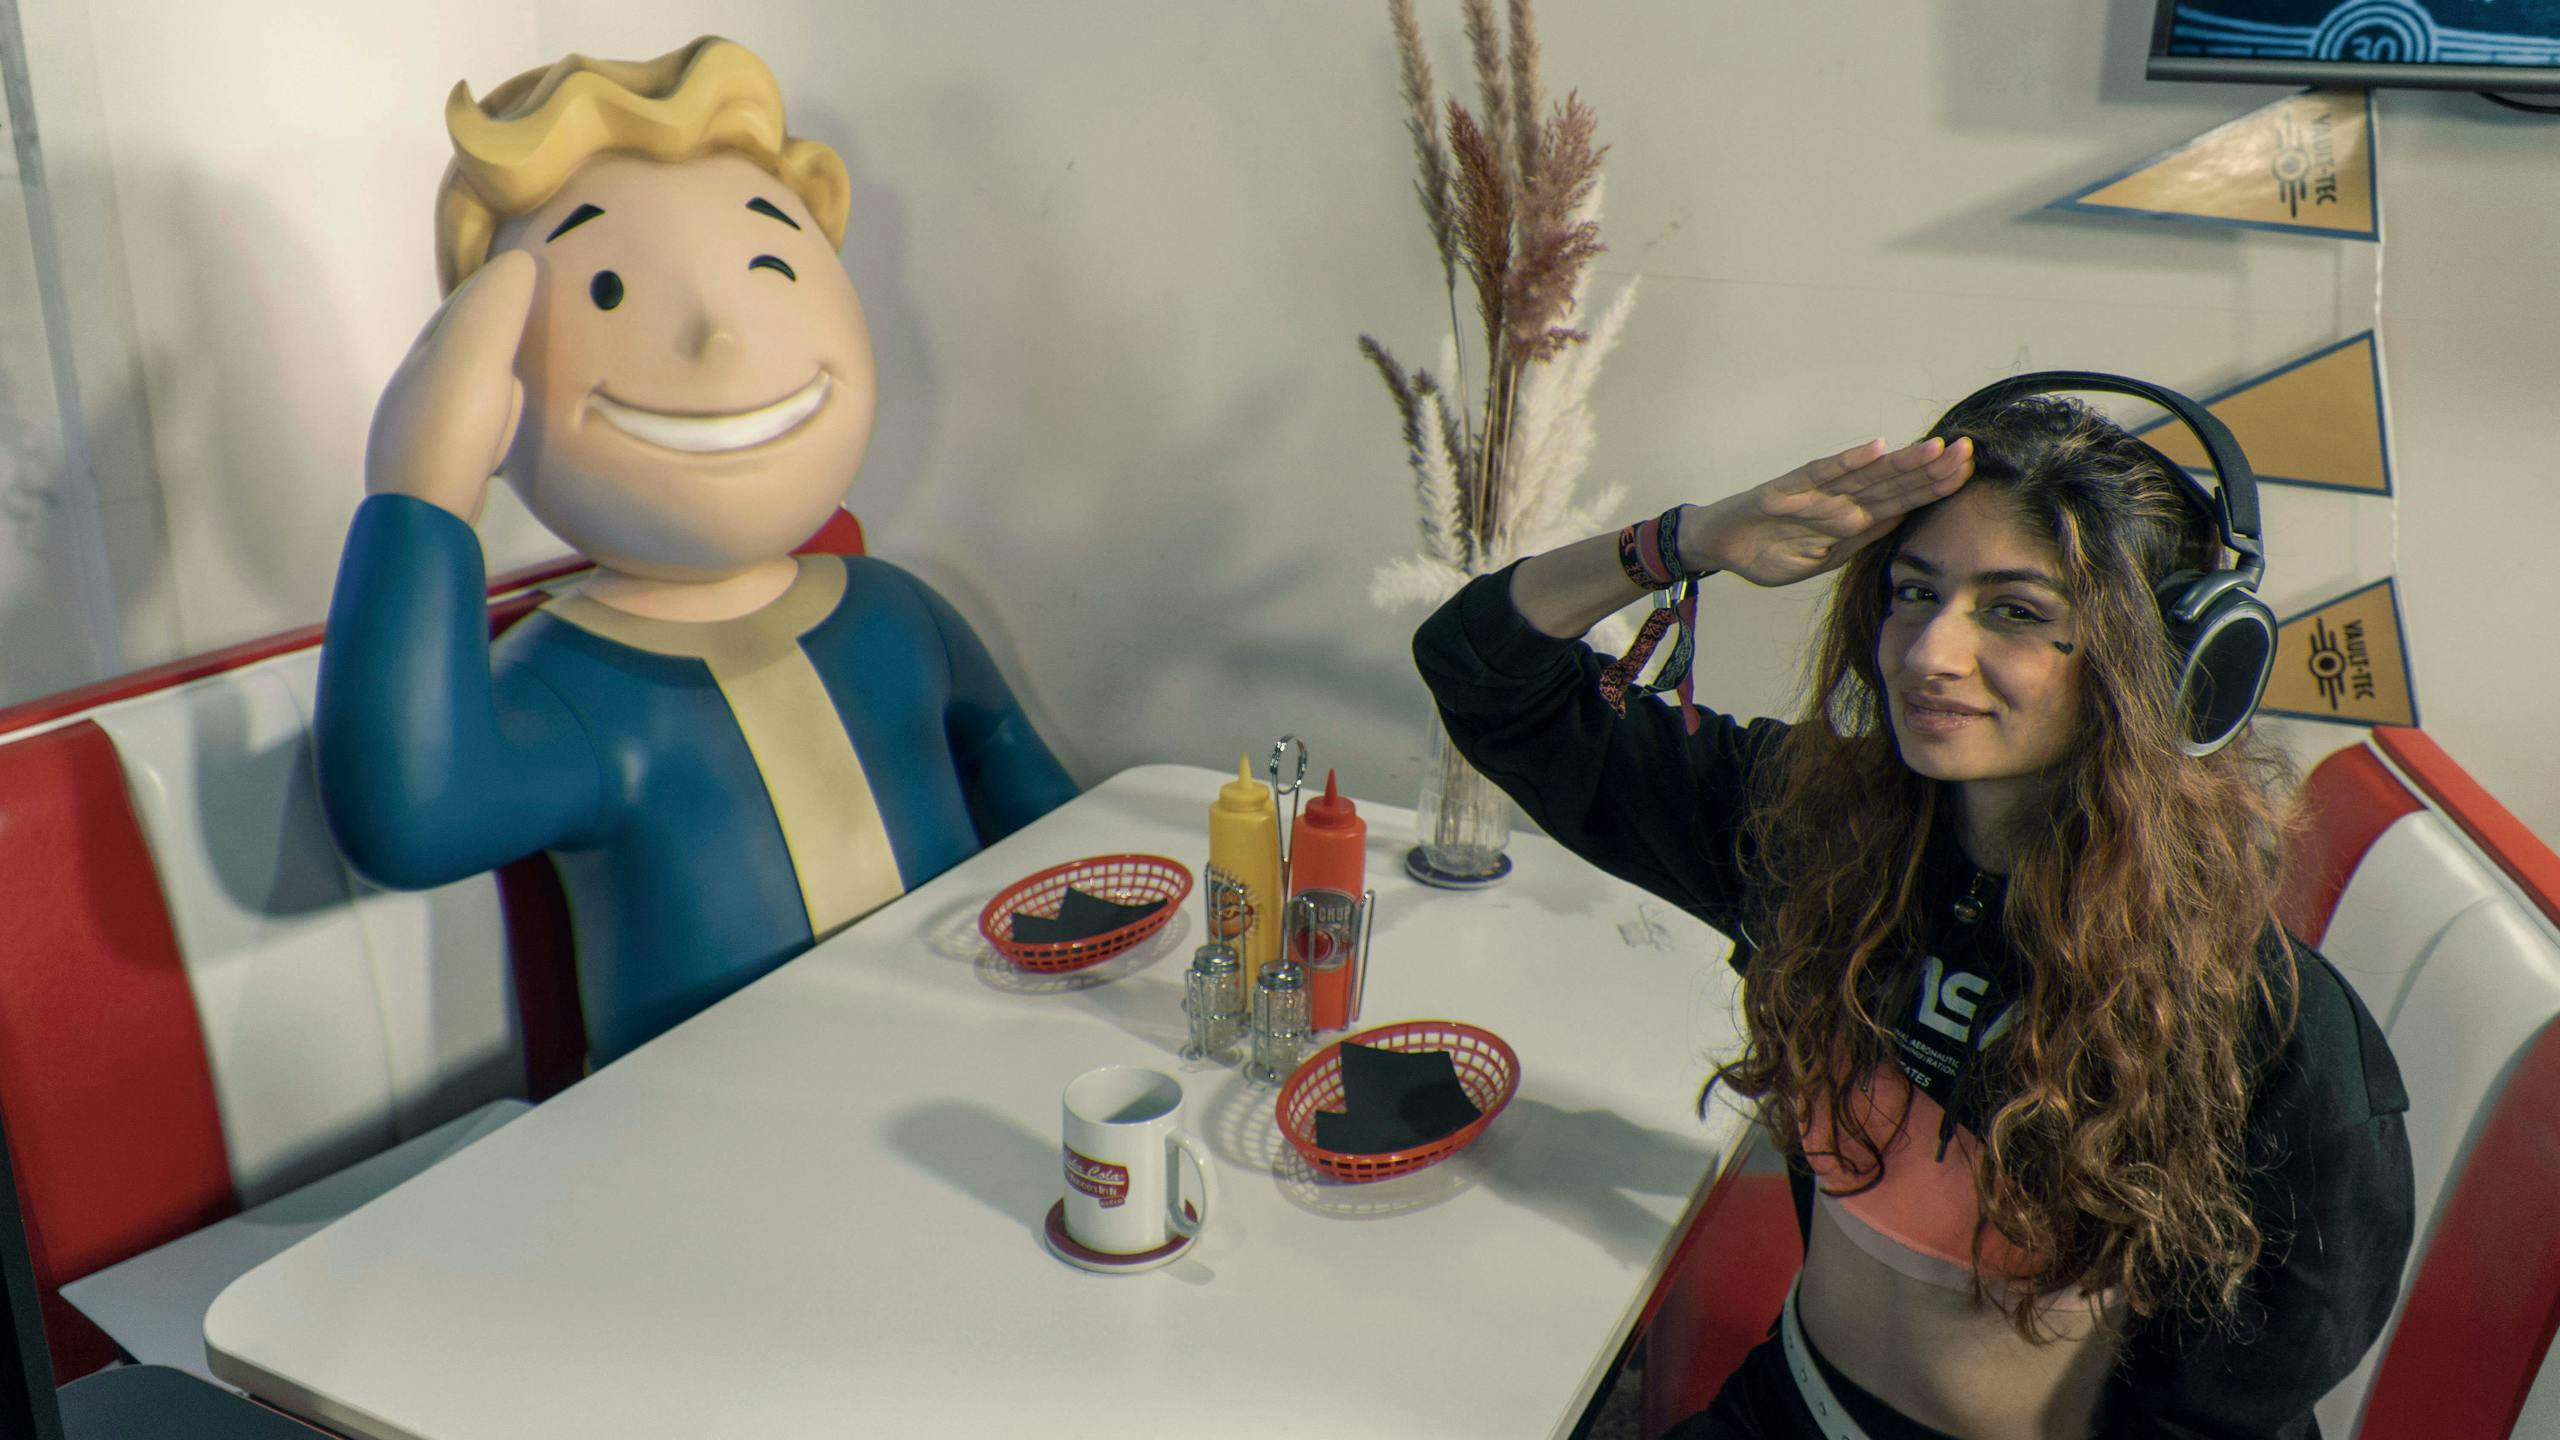 Gaming Setup Fallout style: Vault Boy and Gamer girl salute.